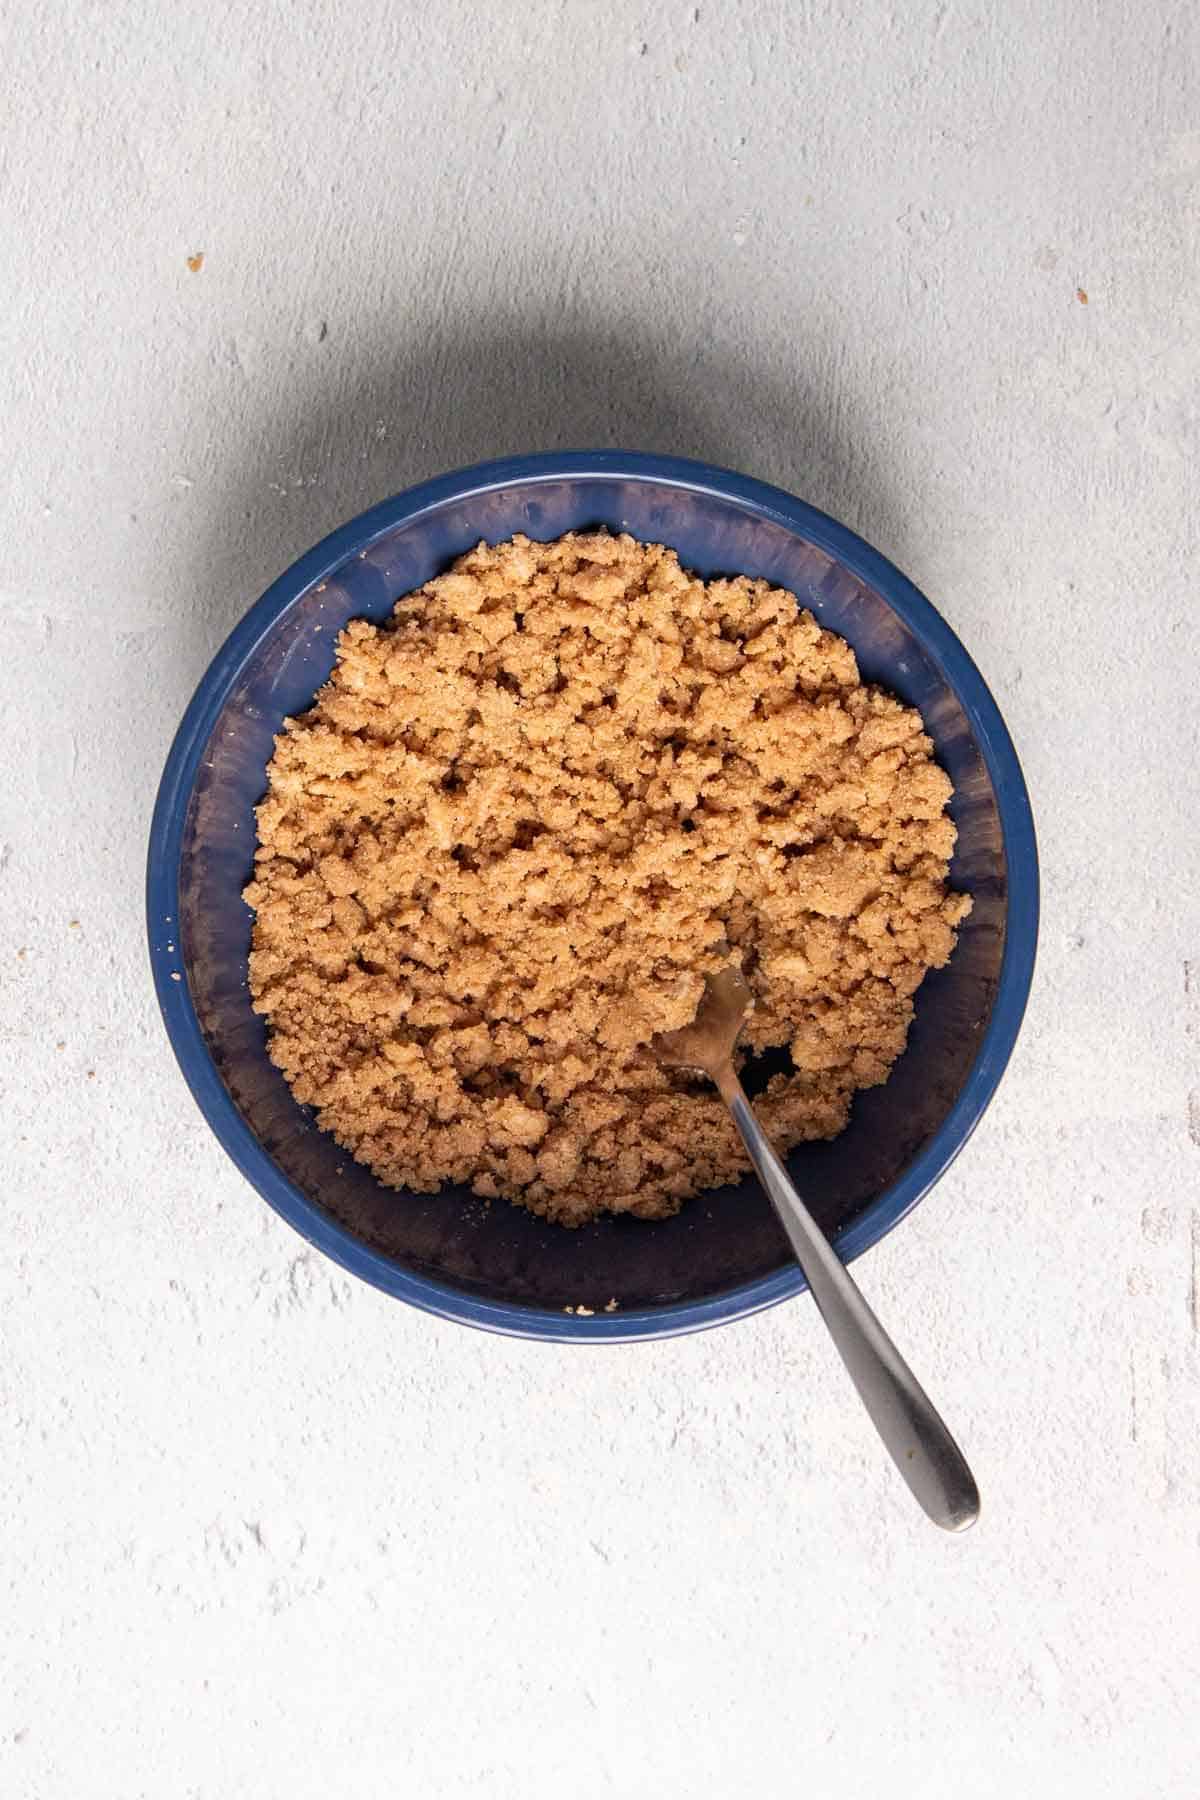 Coffee cake streusel topping